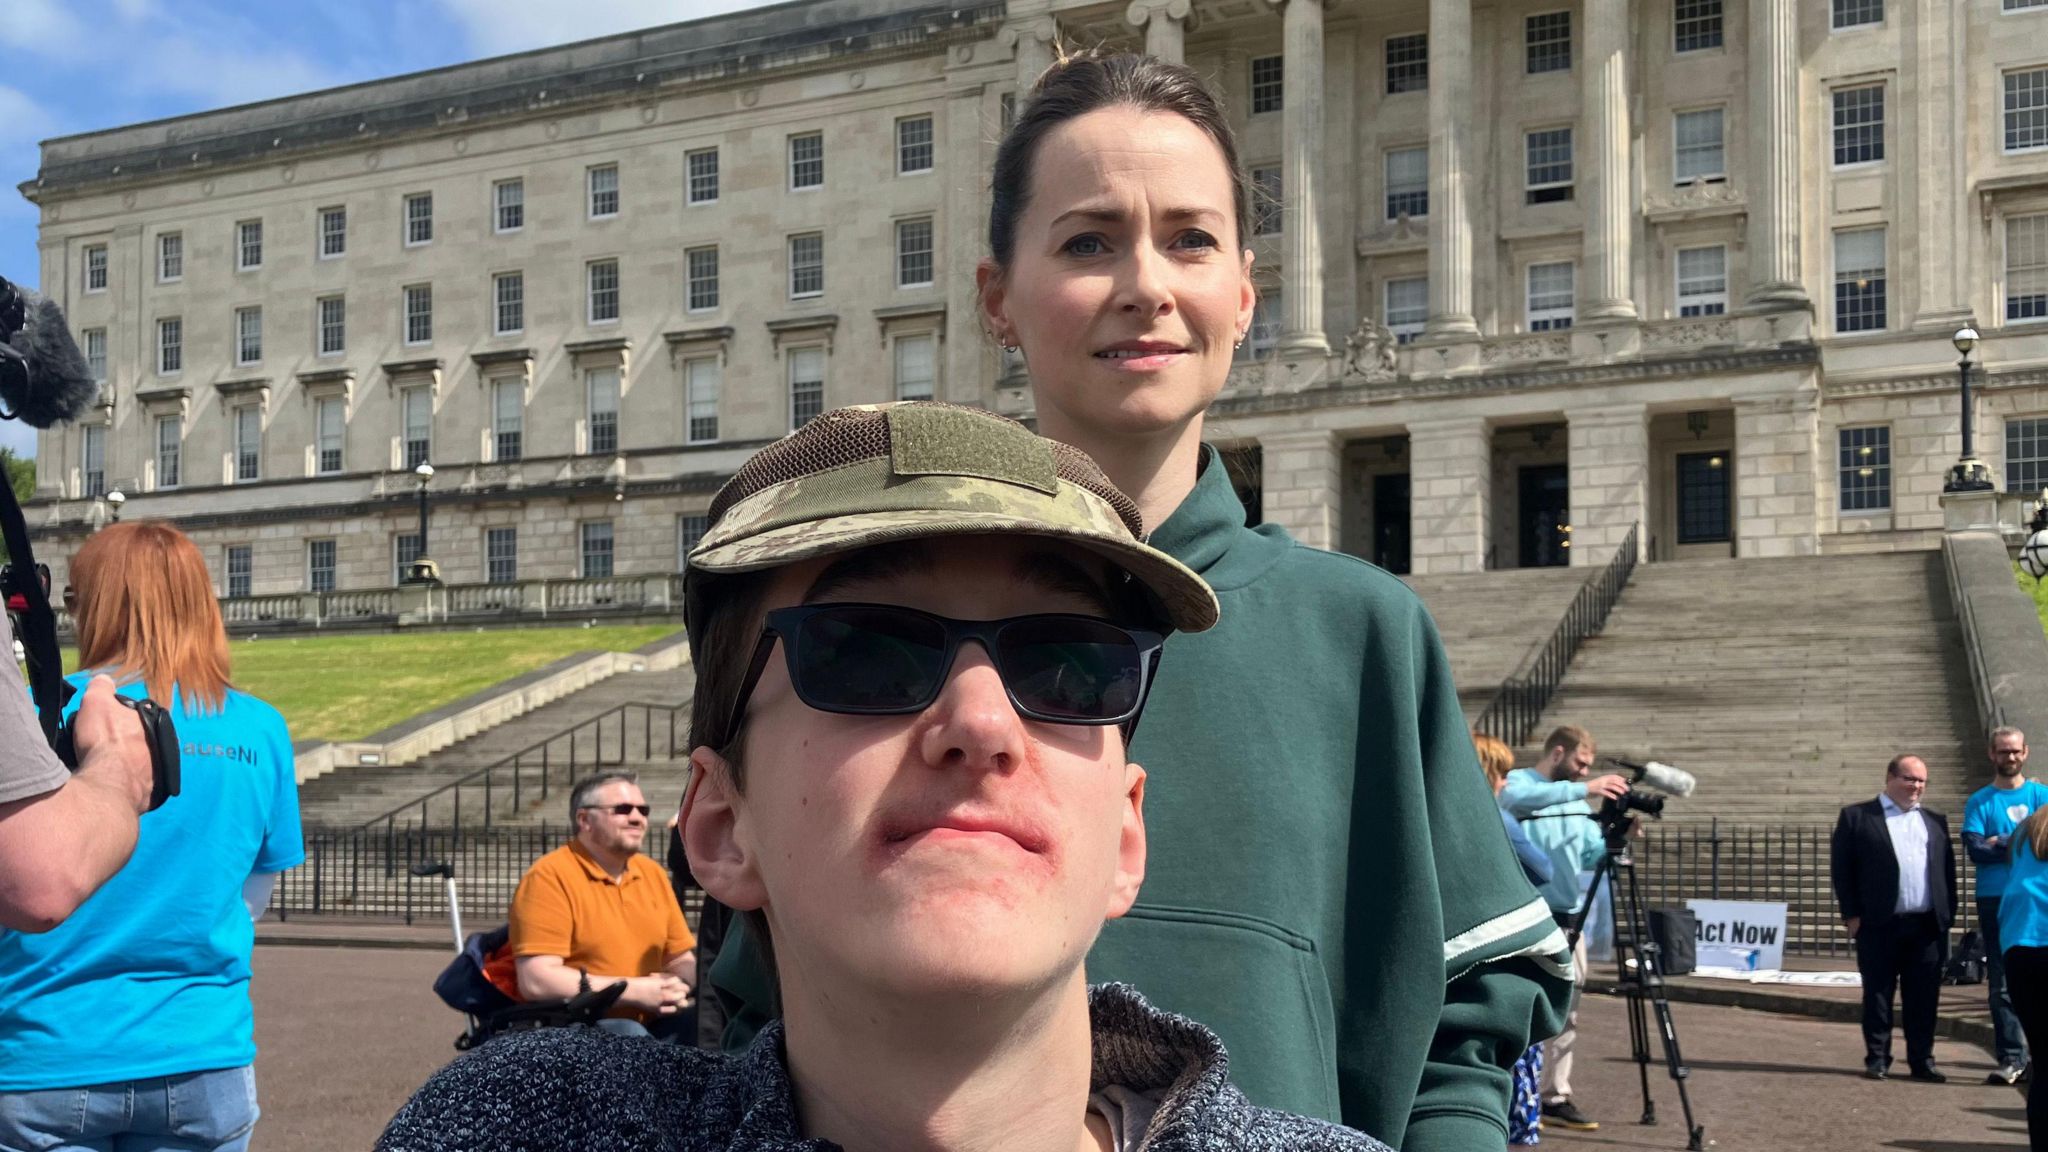 Tiernan Flood wears a cap and sunglasses while he and his mother, Tanya Davis, pose for a photo in front of Stormont